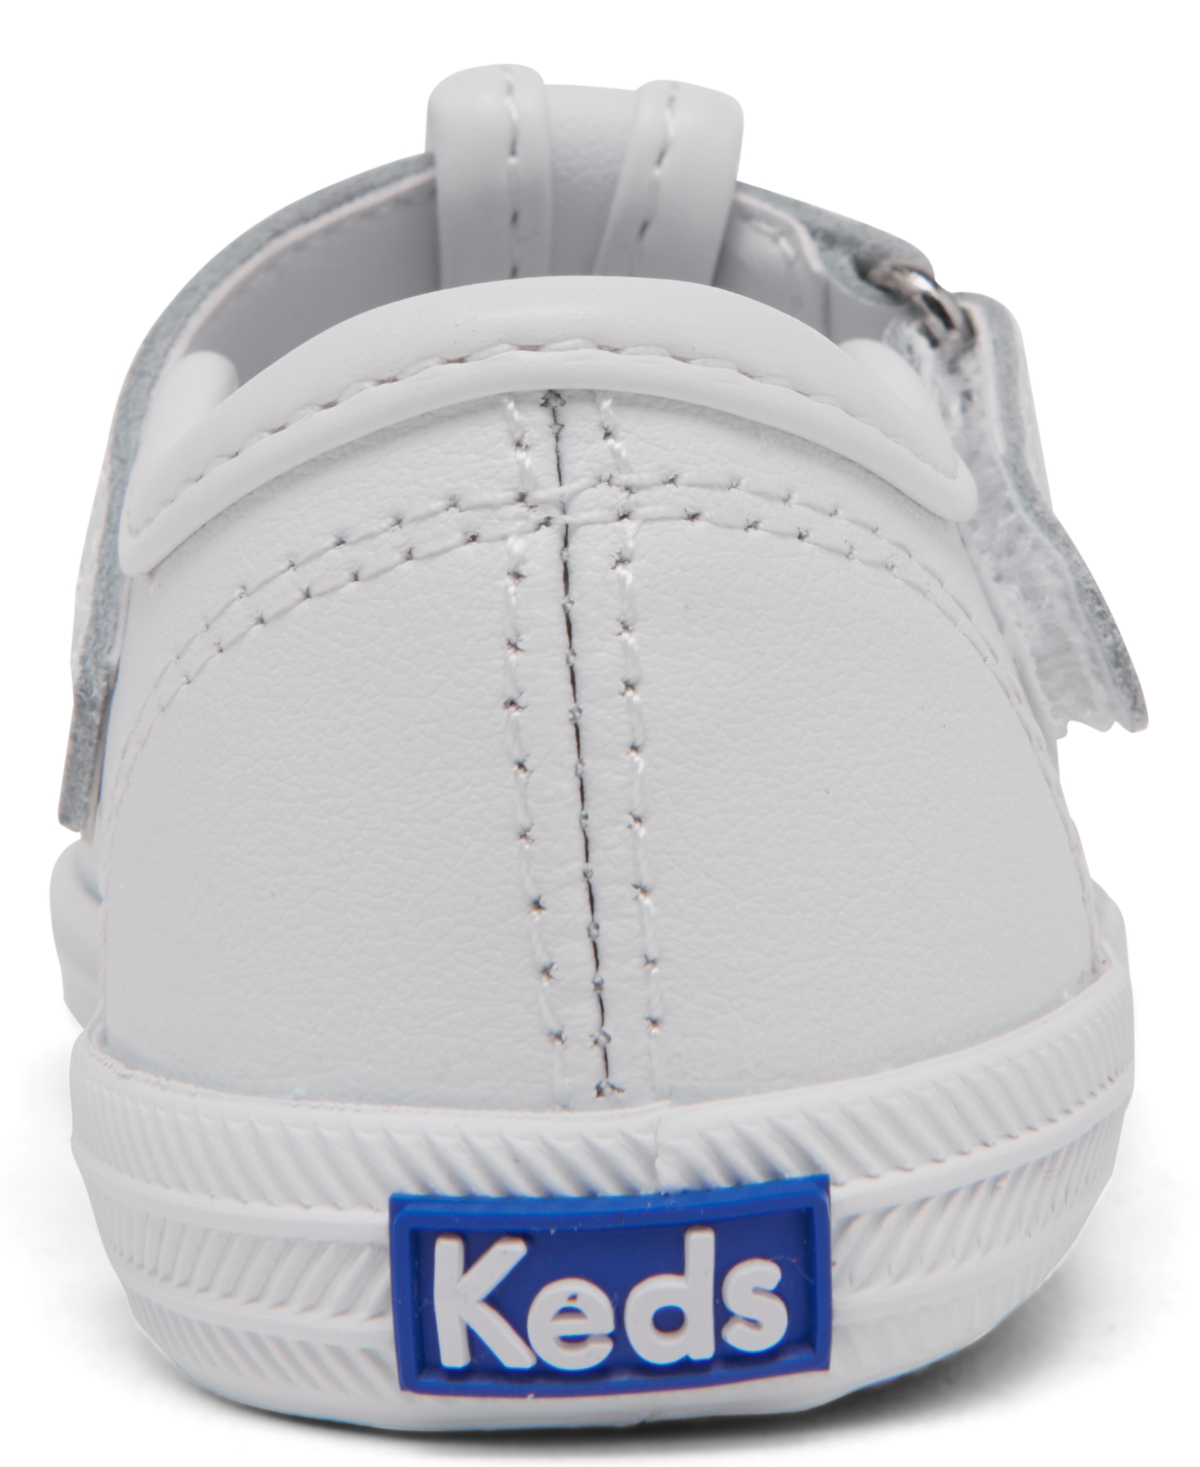 UPC 044214157174 product image for Keds Champion Toe-Cap T-Strap Shoes, Baby Girls & Toddler Girls | upcitemdb.com